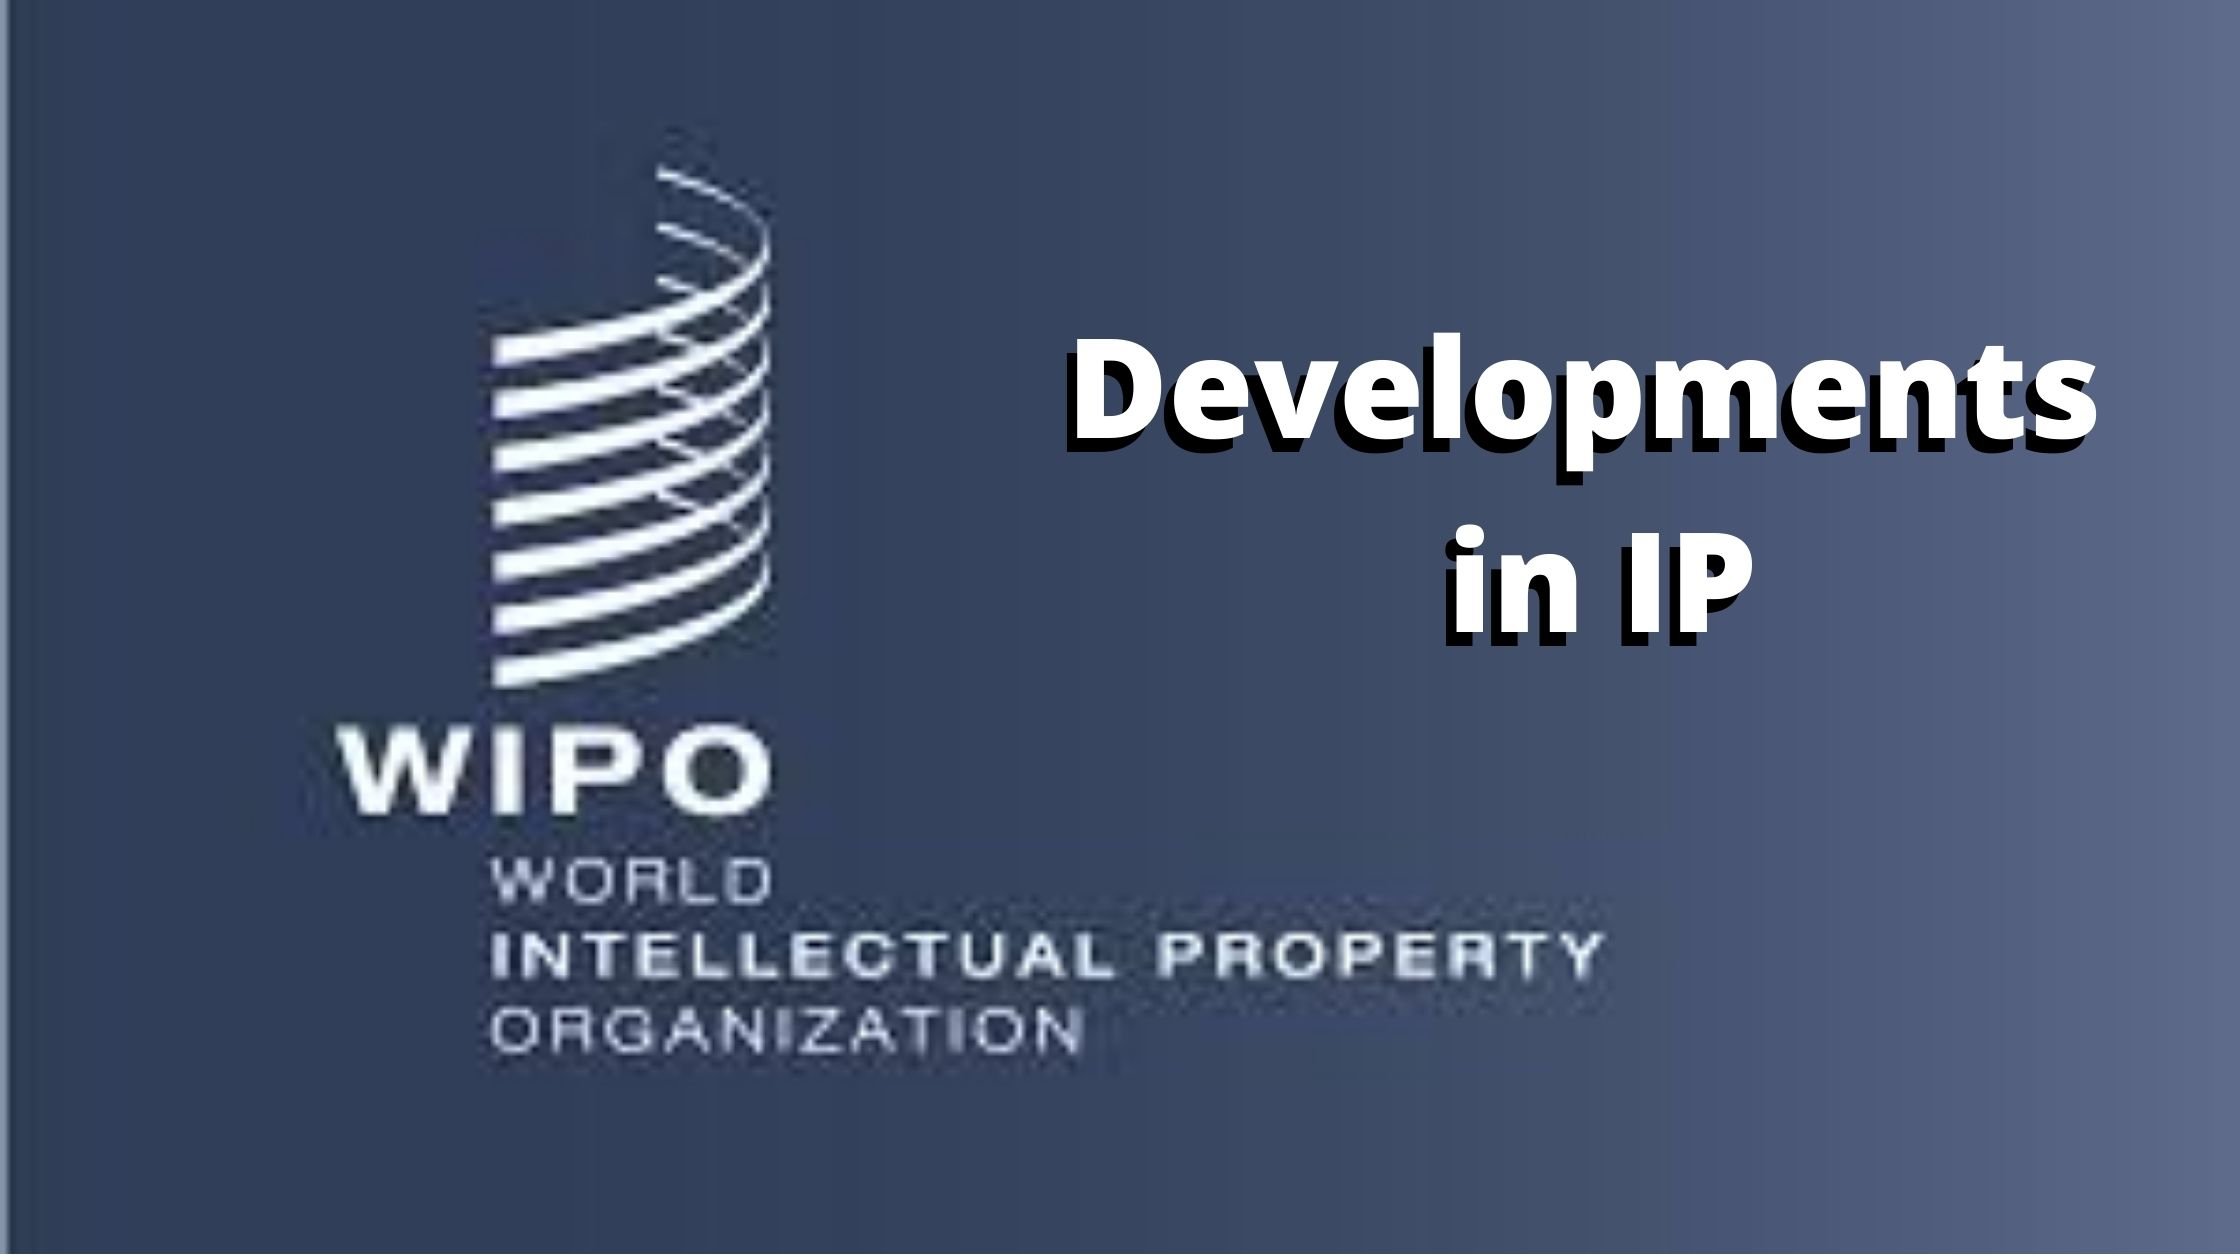 Role of WIPO in Development of IP